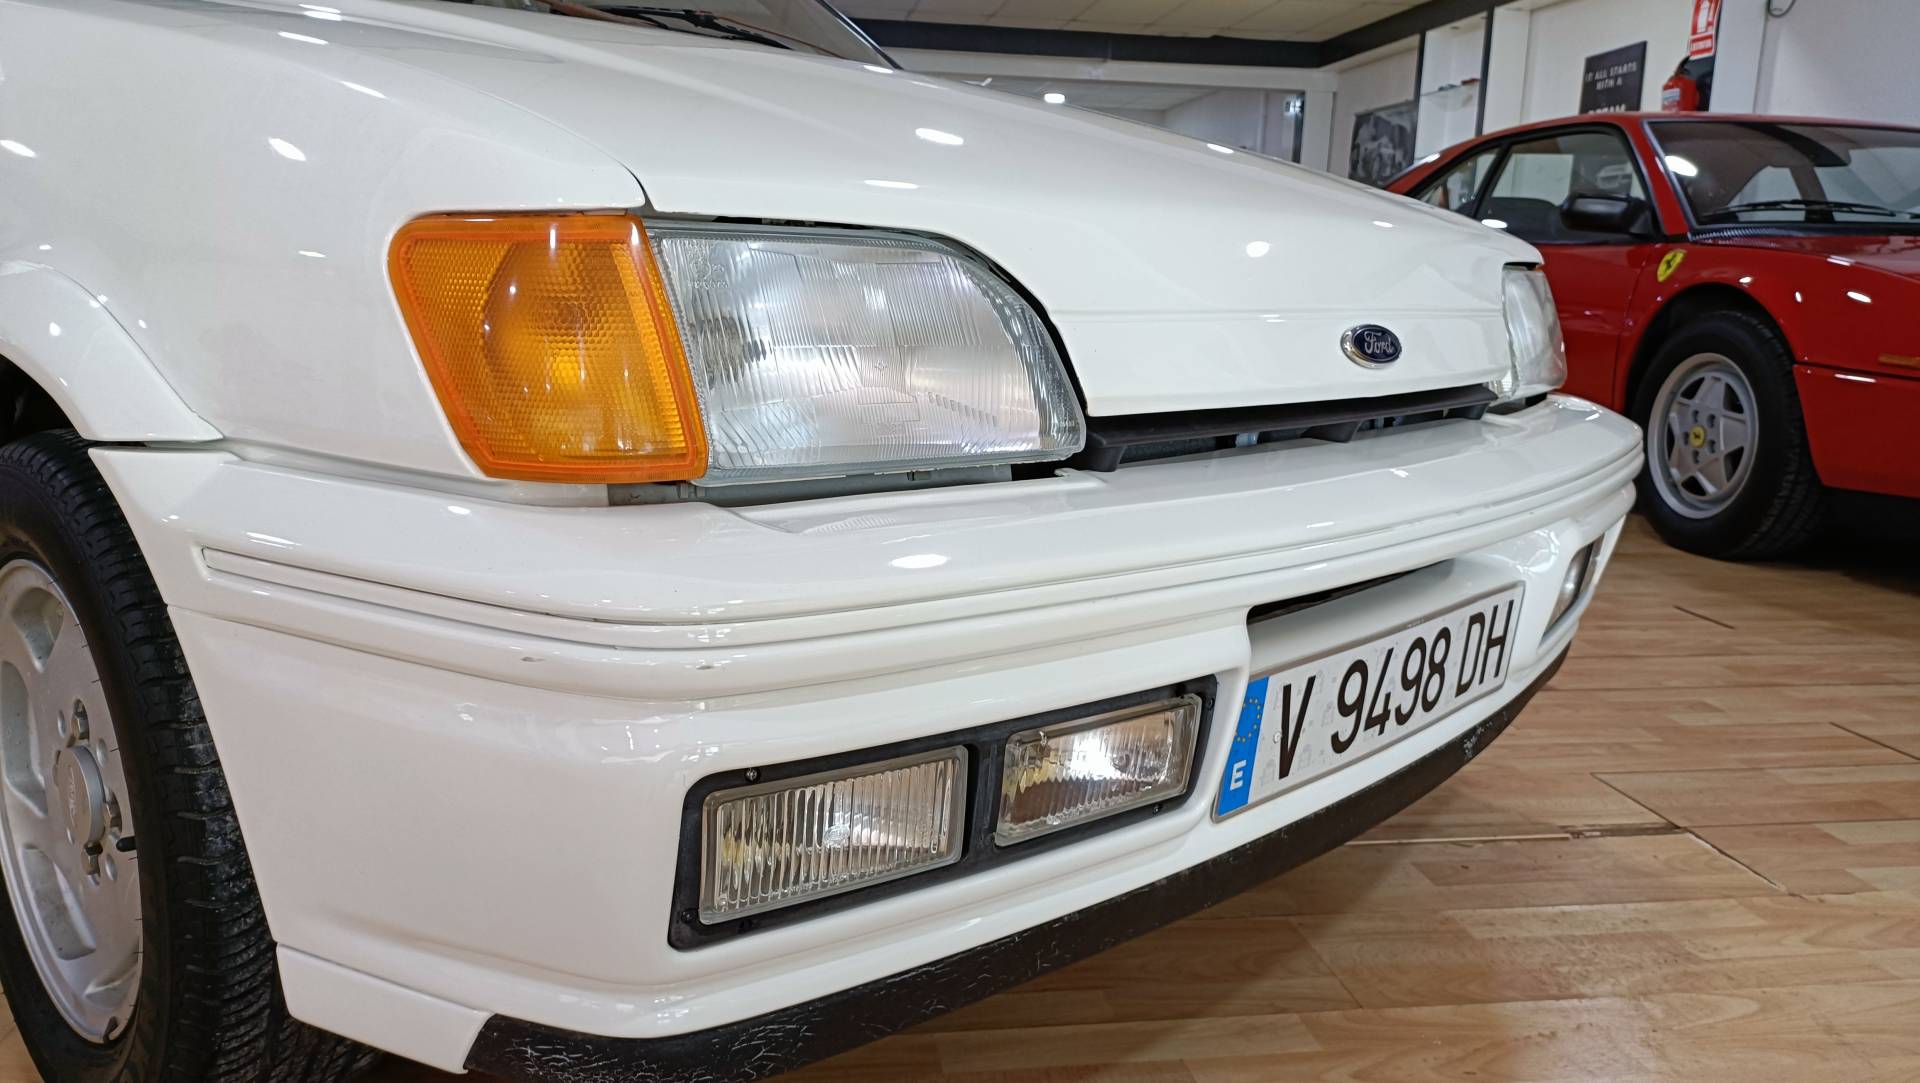 For Sale: Ford Fiesta XR2i (1990) offered for €4,900